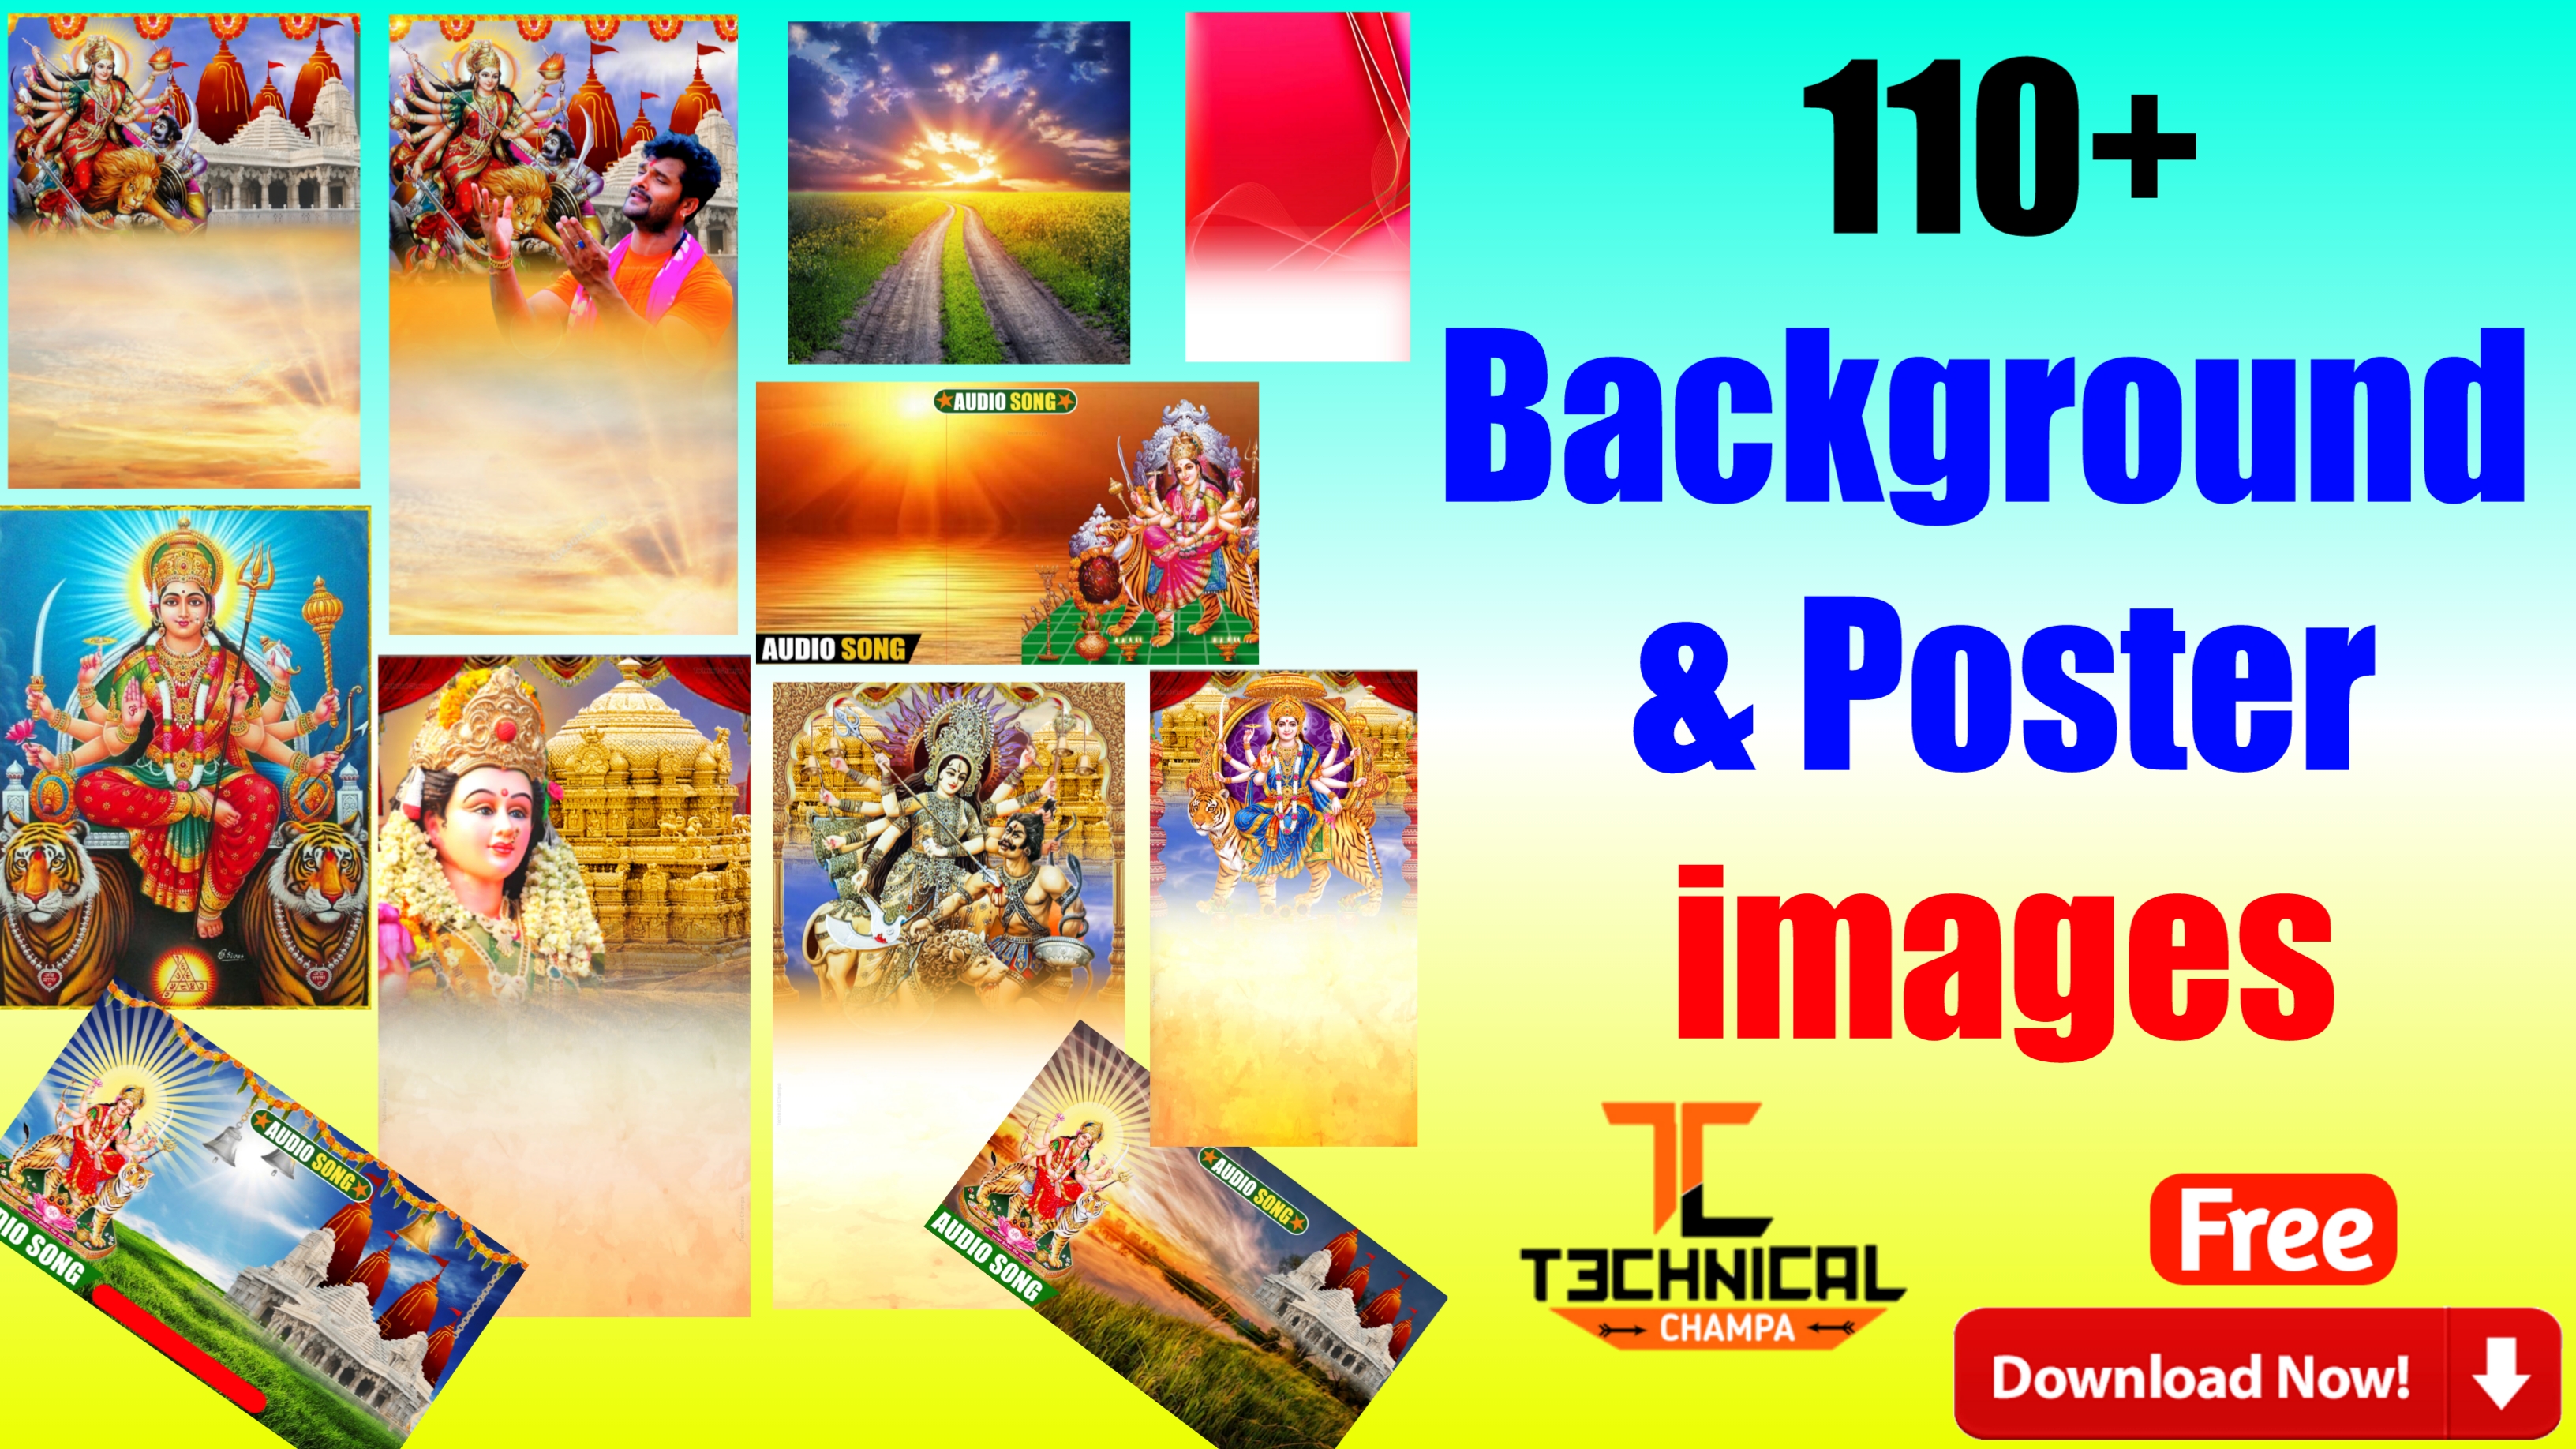 Durga Puja Background Poster { Technical Champa }